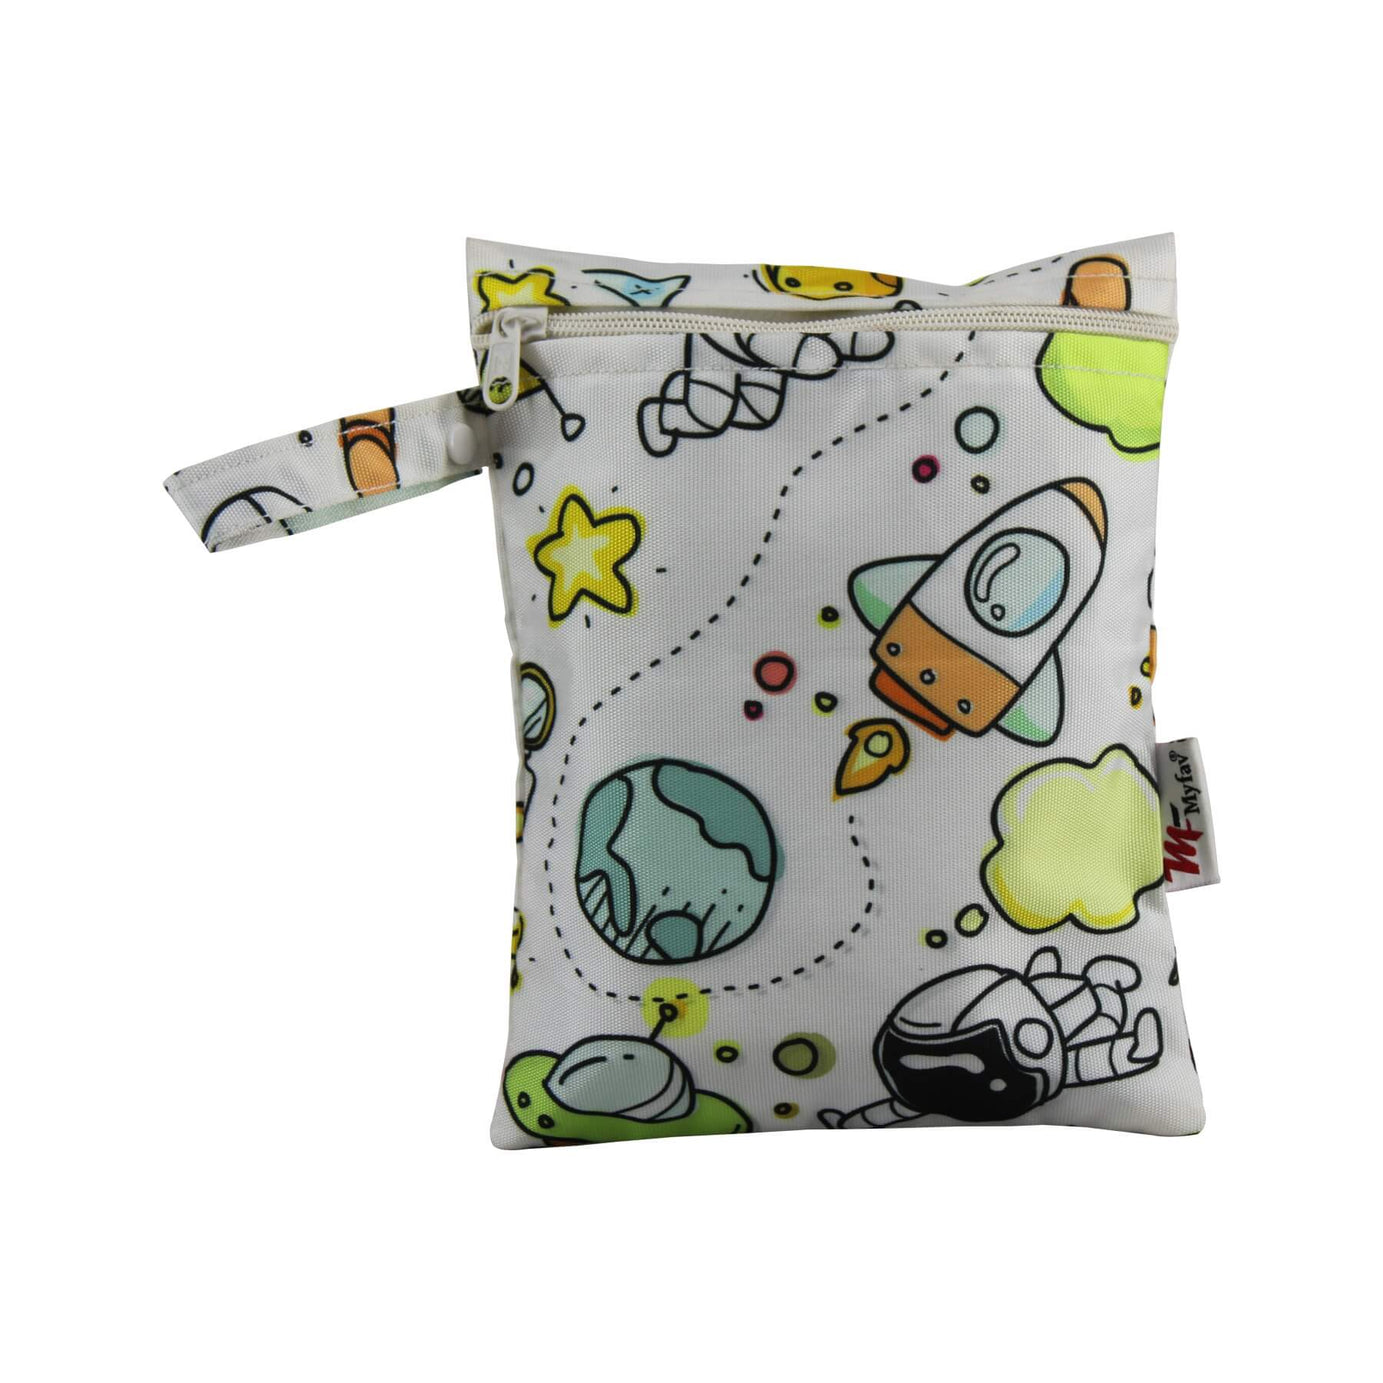 My Fav White Space Print Multiutility Wet Dry Pouch/Diaper Bag/Travel Pouch/Travel Kit